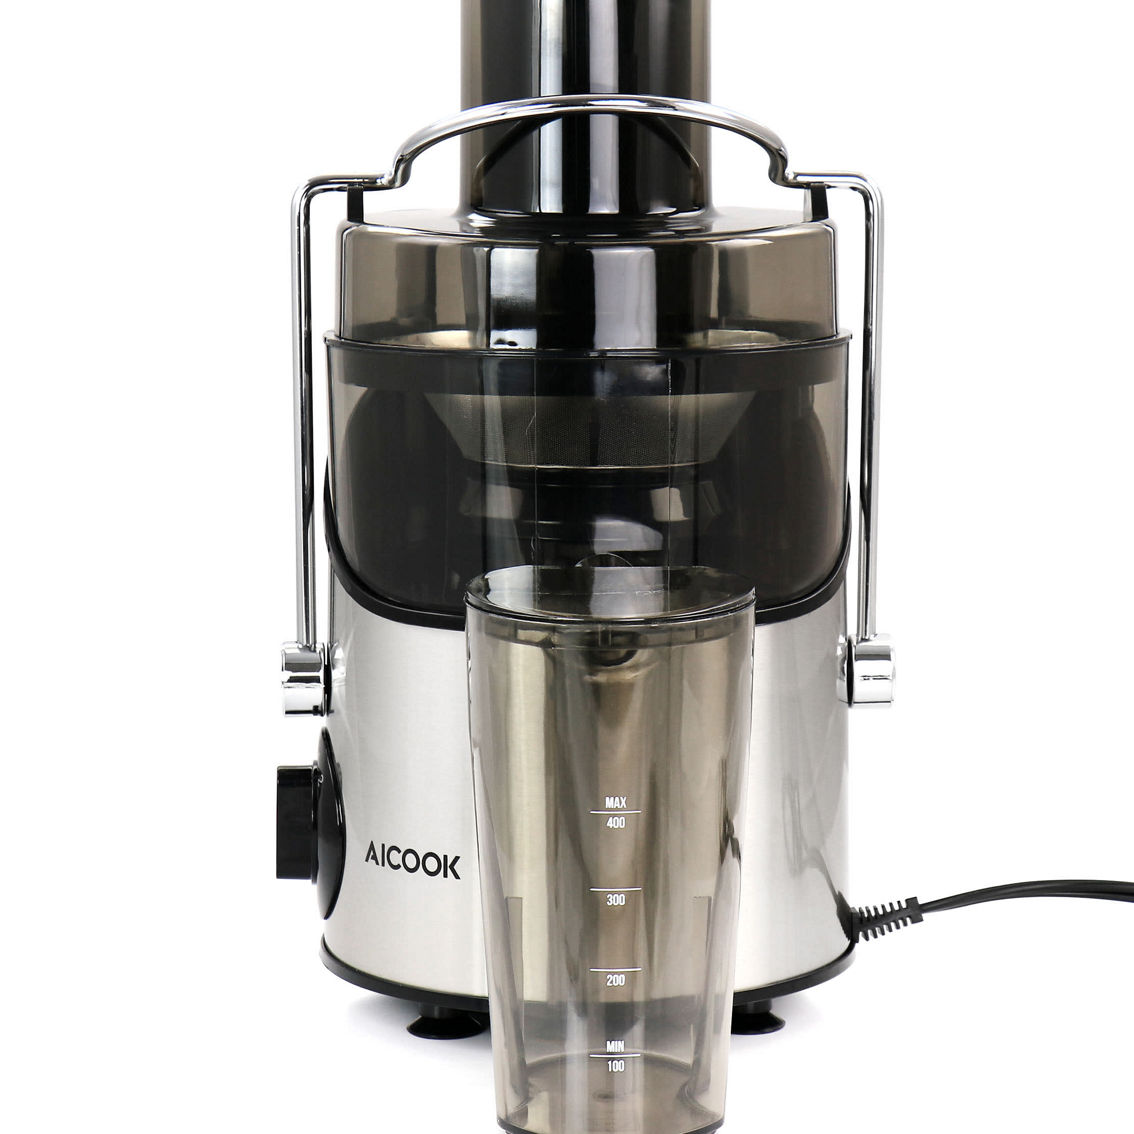 AICOOK Centrifugal Self Cleaning Juicer and Juice Extractor in Silver - Image 3 of 5